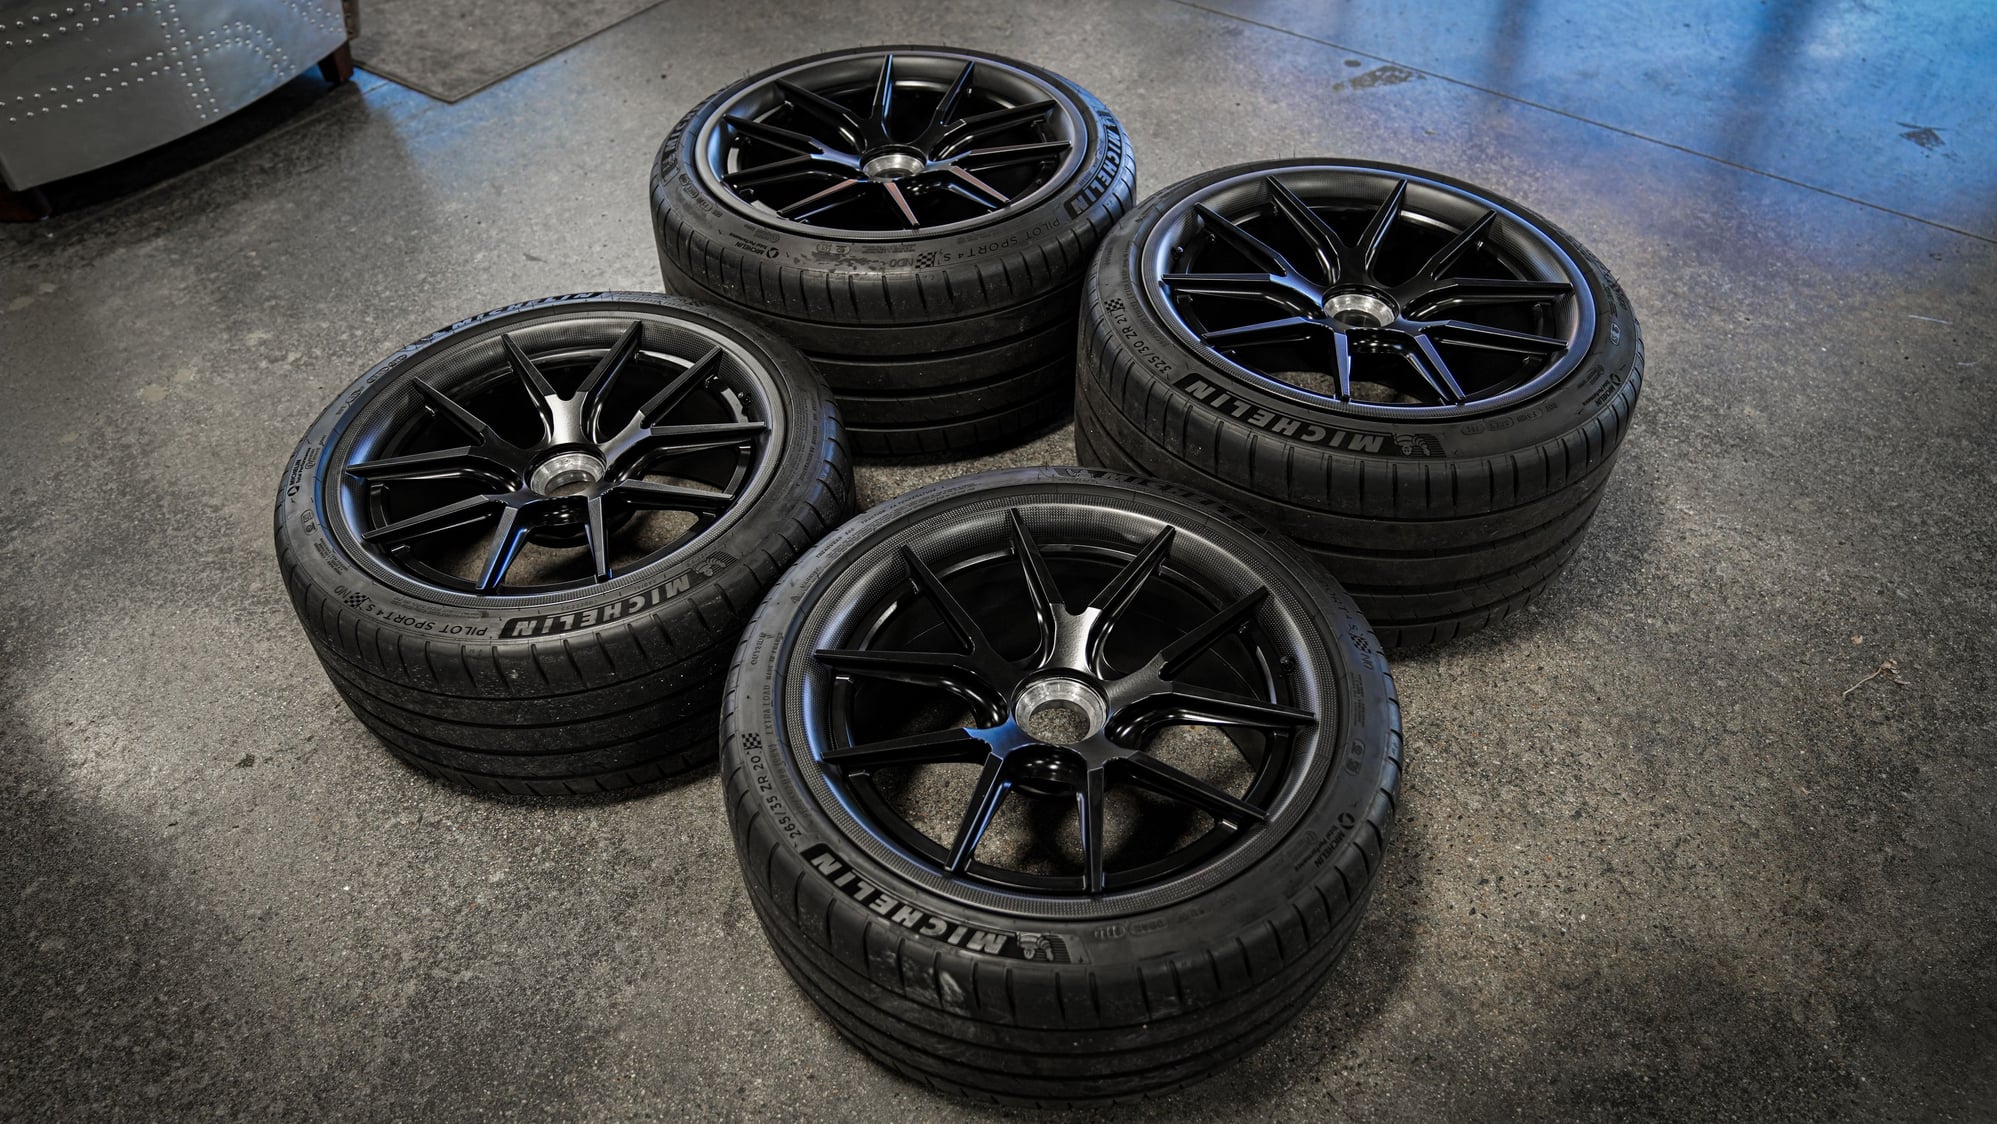 Wheels and Tires/Axles - CARBON FORGELINE WHEELS (CF201) - Used - All Years  All Models - Sterling, VA 20166, United States